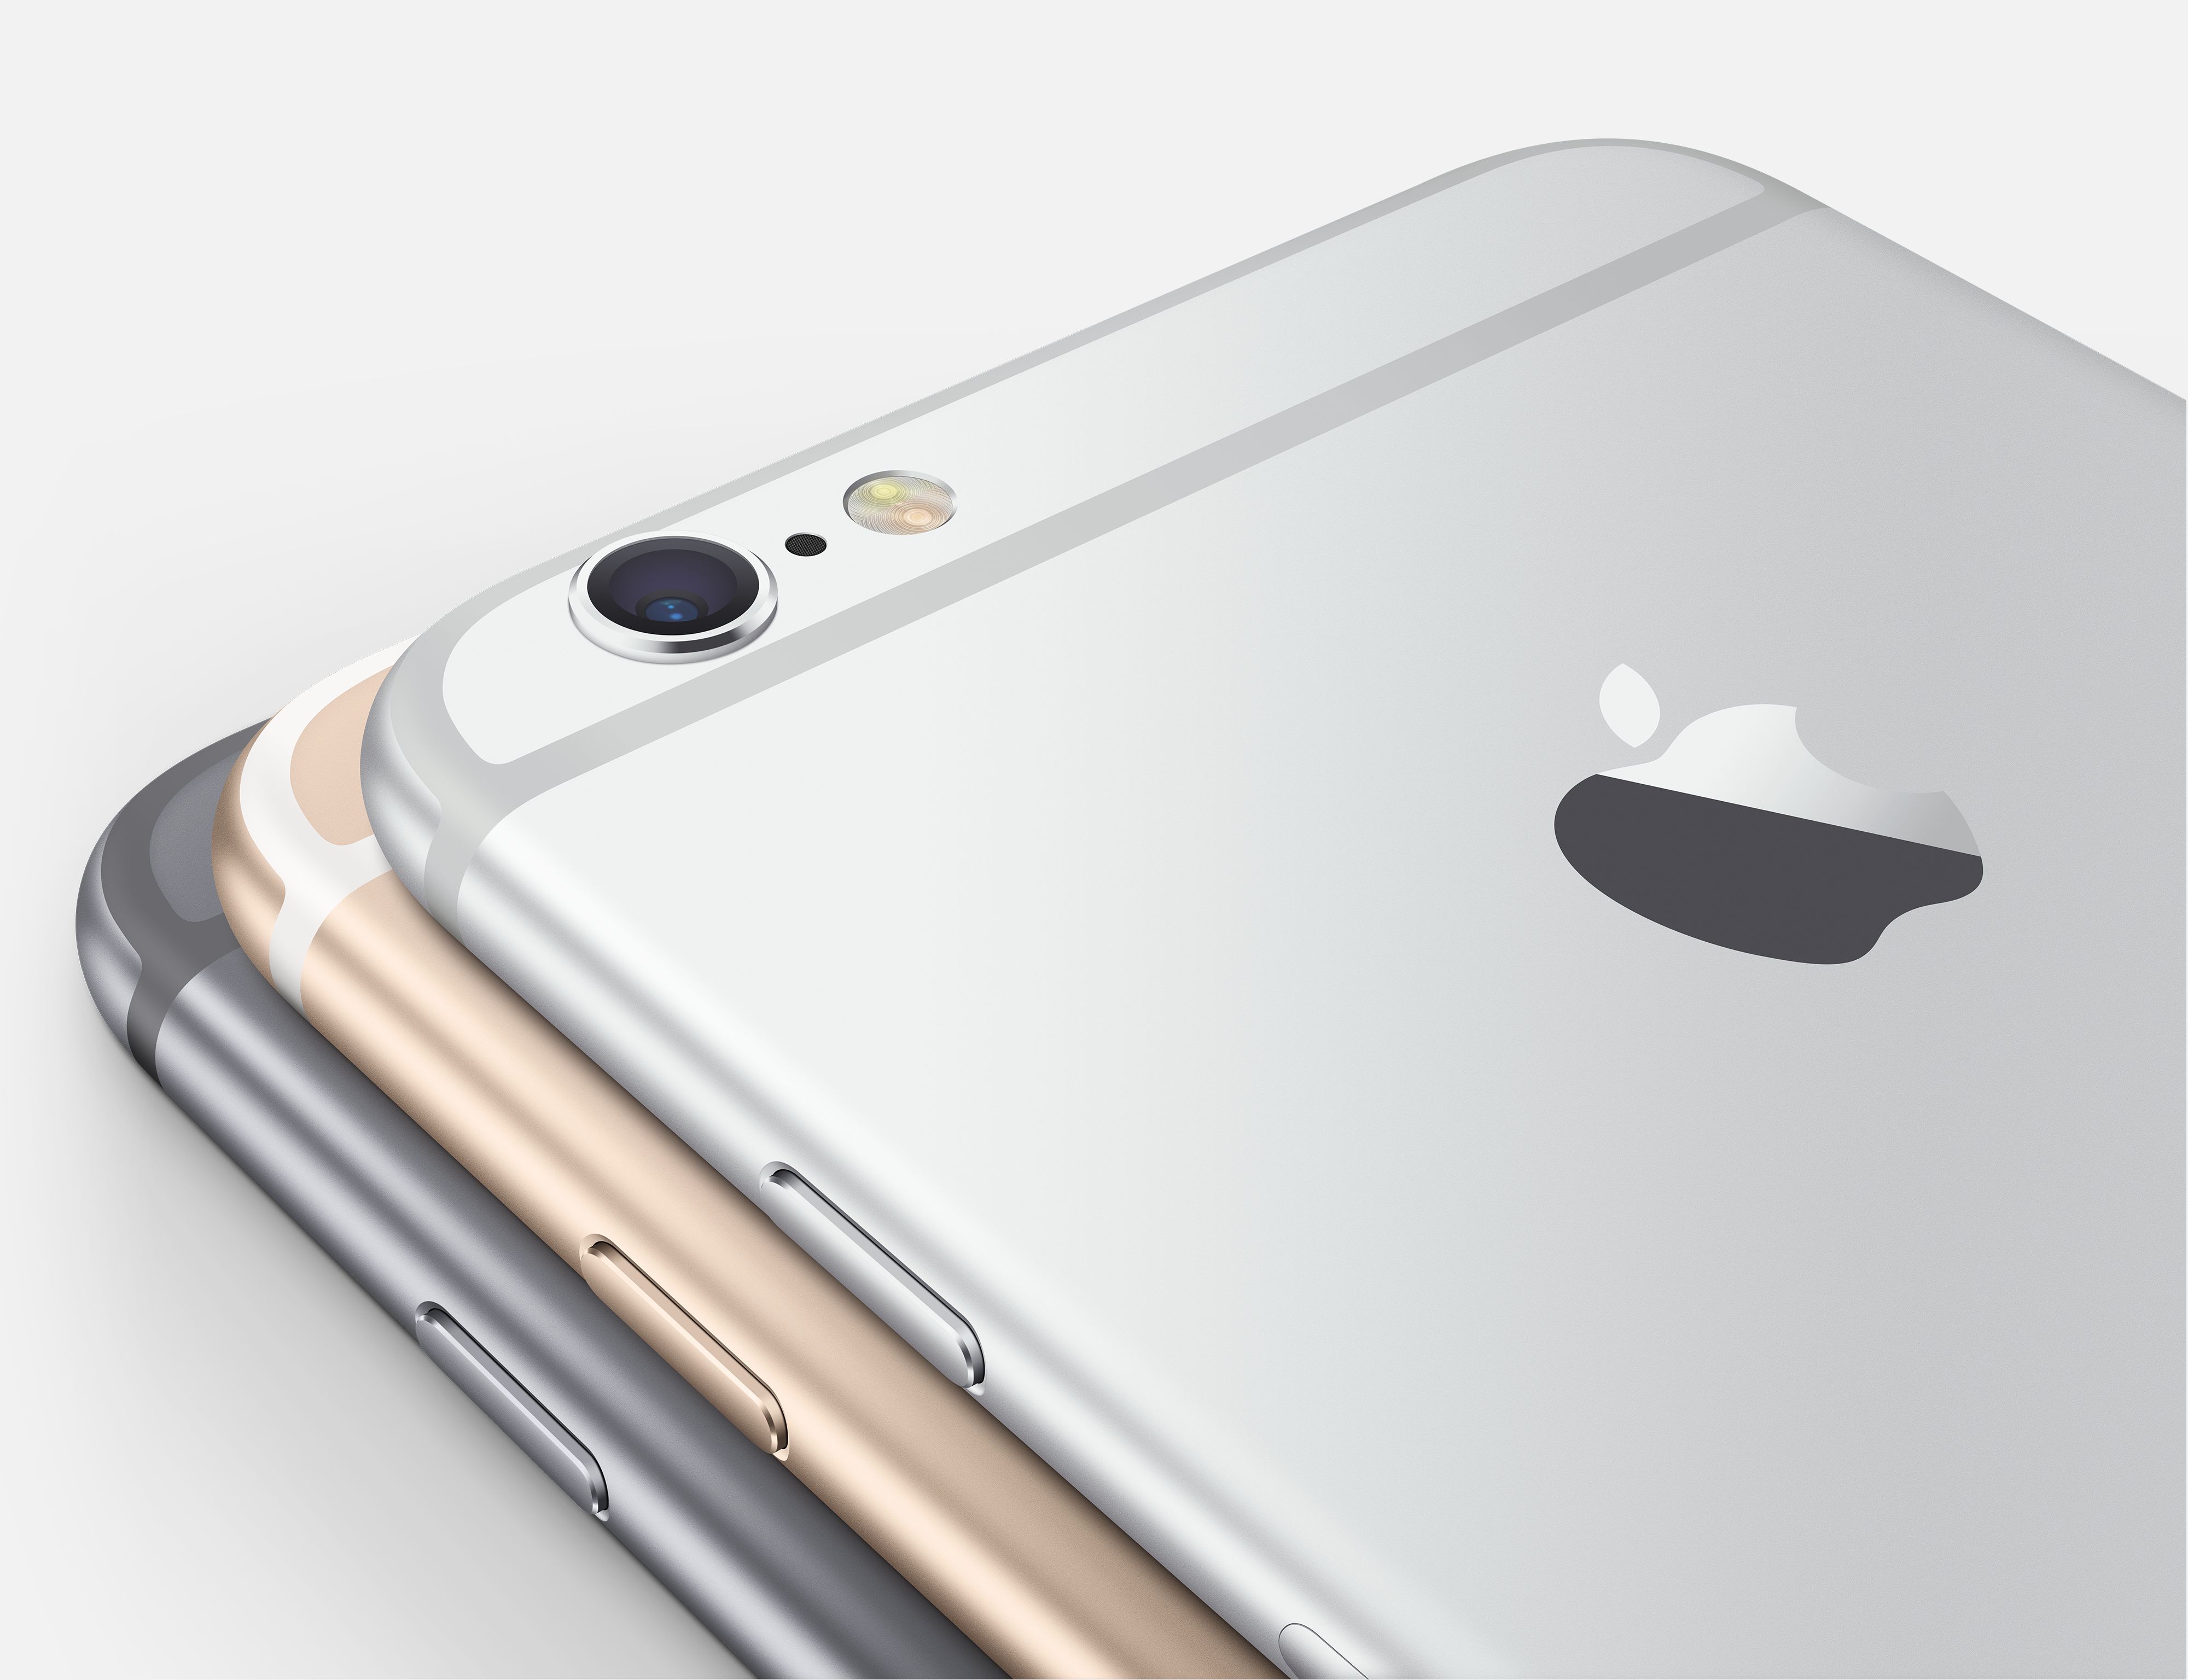 AT&T iPhone 6 upgrades without AT&T Next include a higher fee for some users.